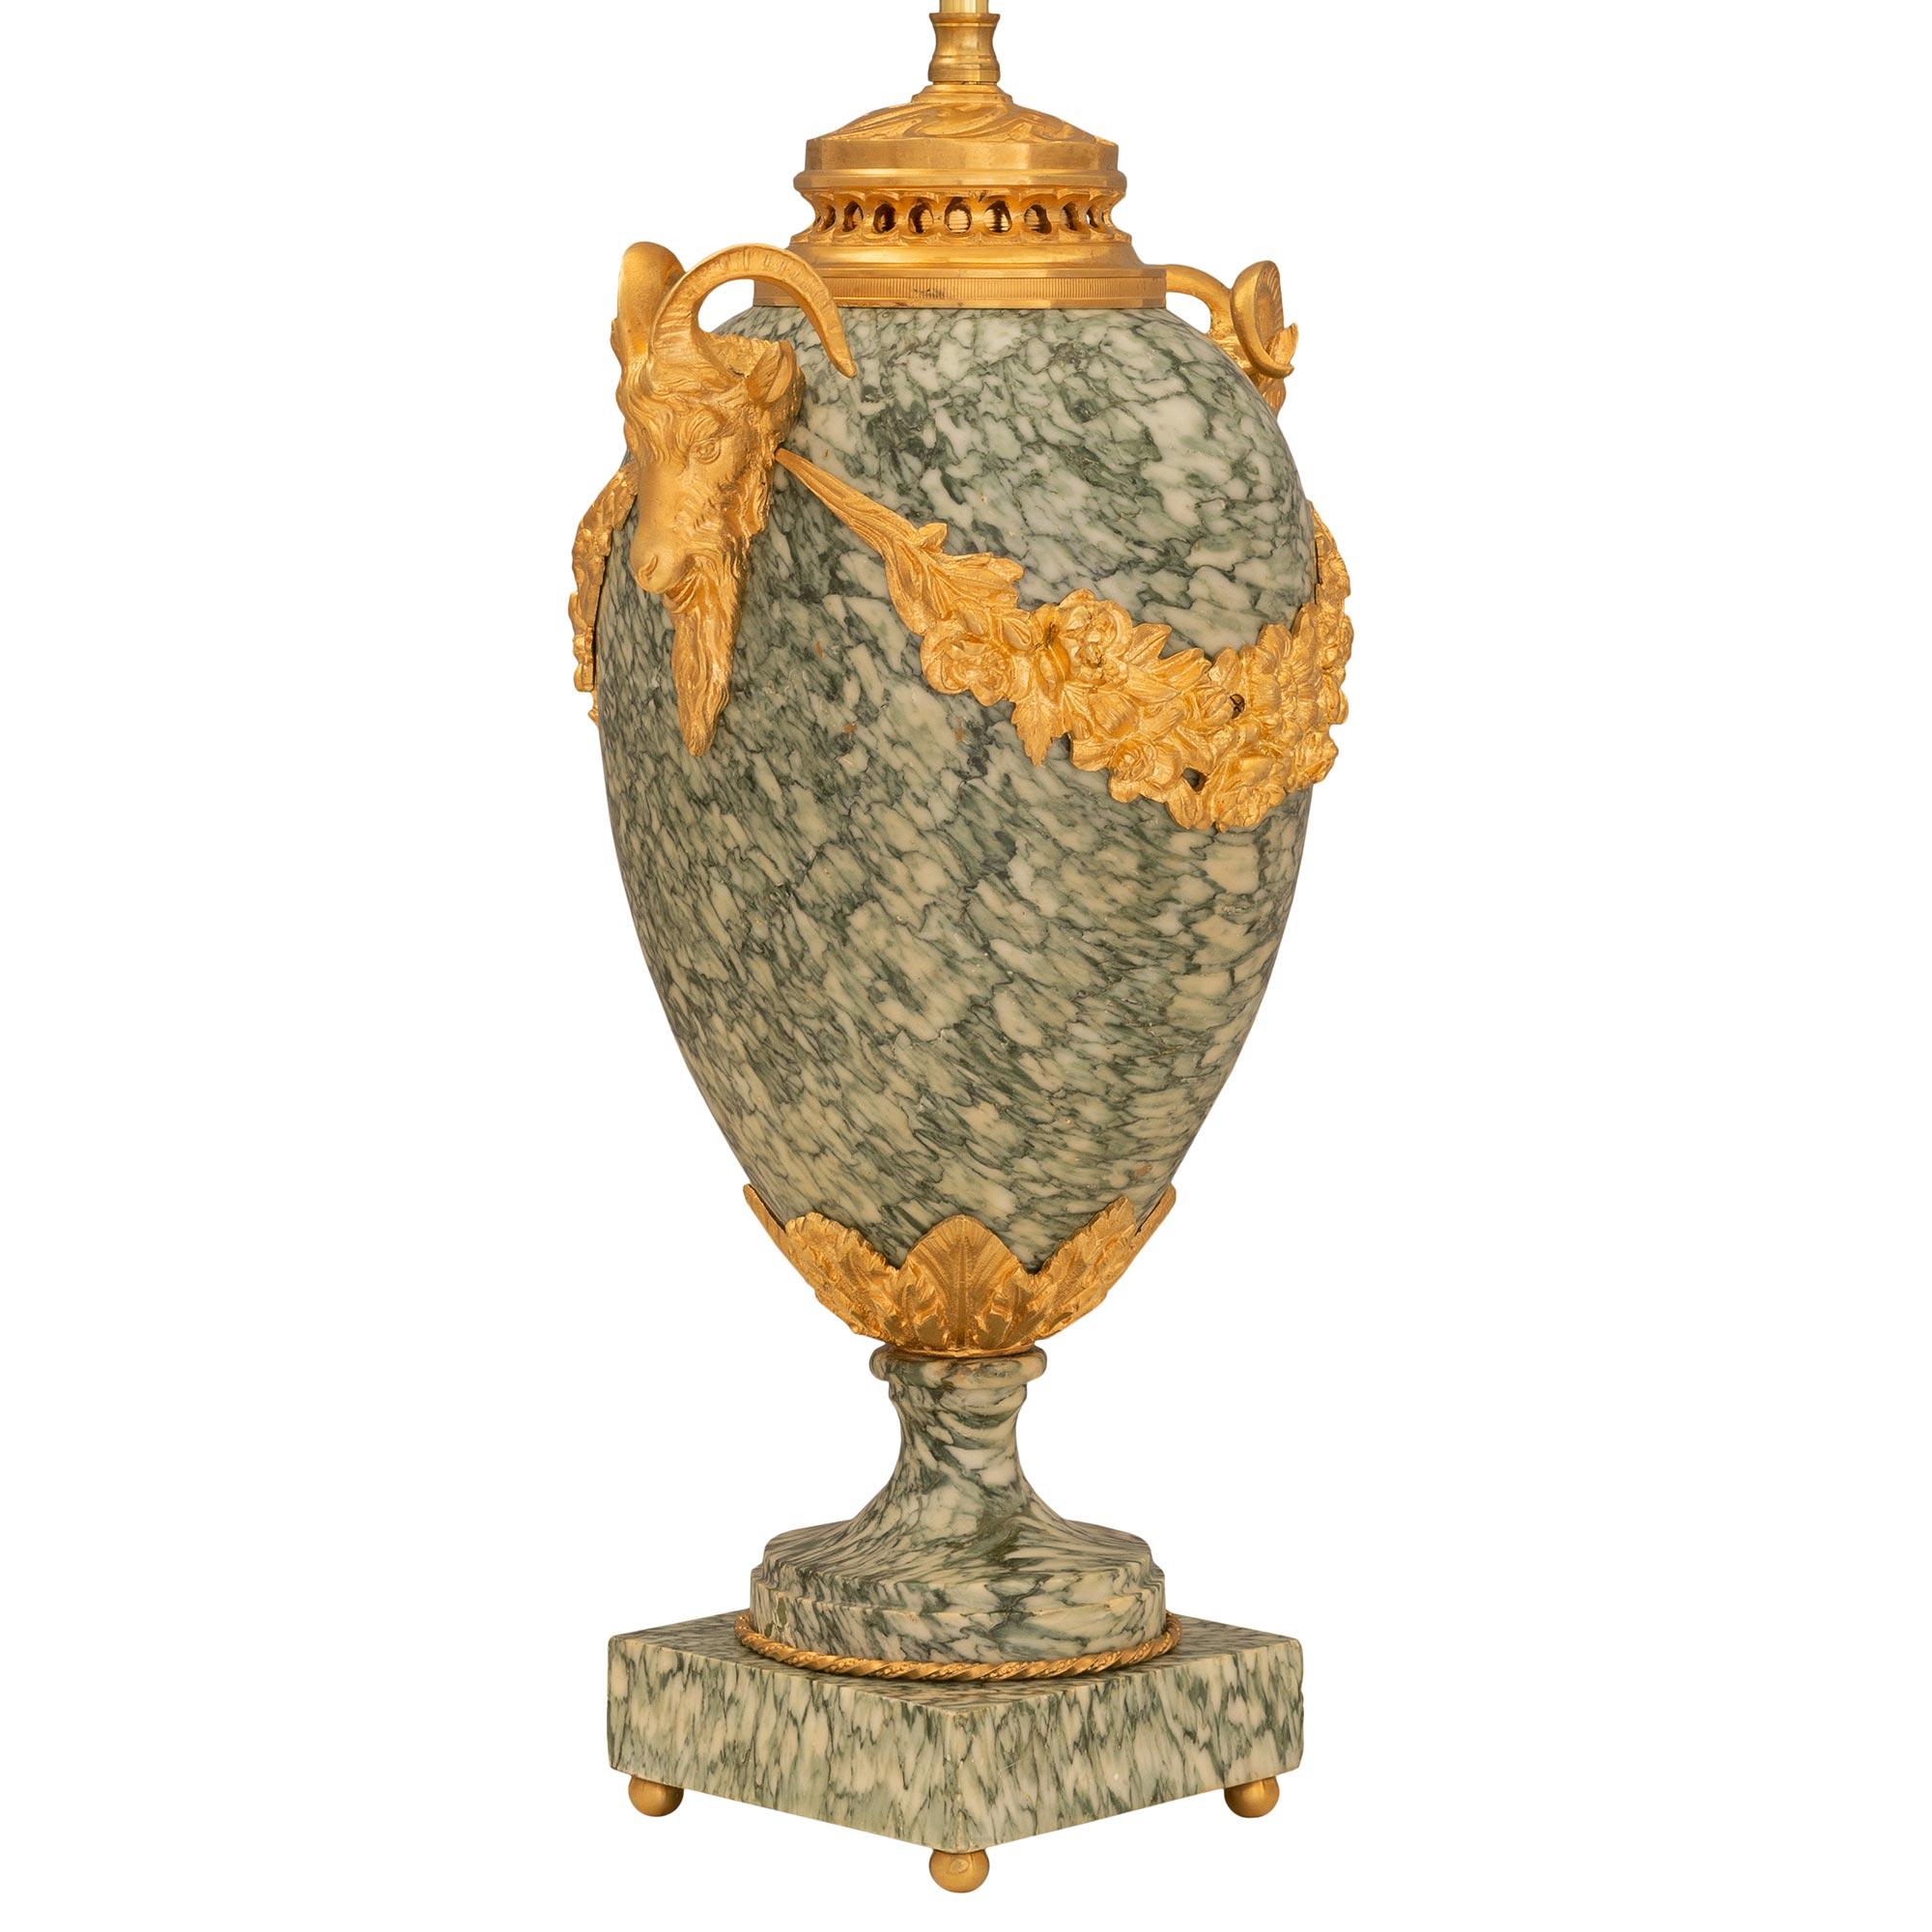 An elegant pair of French 19th century Louis XVI st. ormolu and marble urns mounted into lamps. Each lamp is raised by a square marble base below the richly chased satin and burnished finished socle pedestal with a twisted and fluted design is